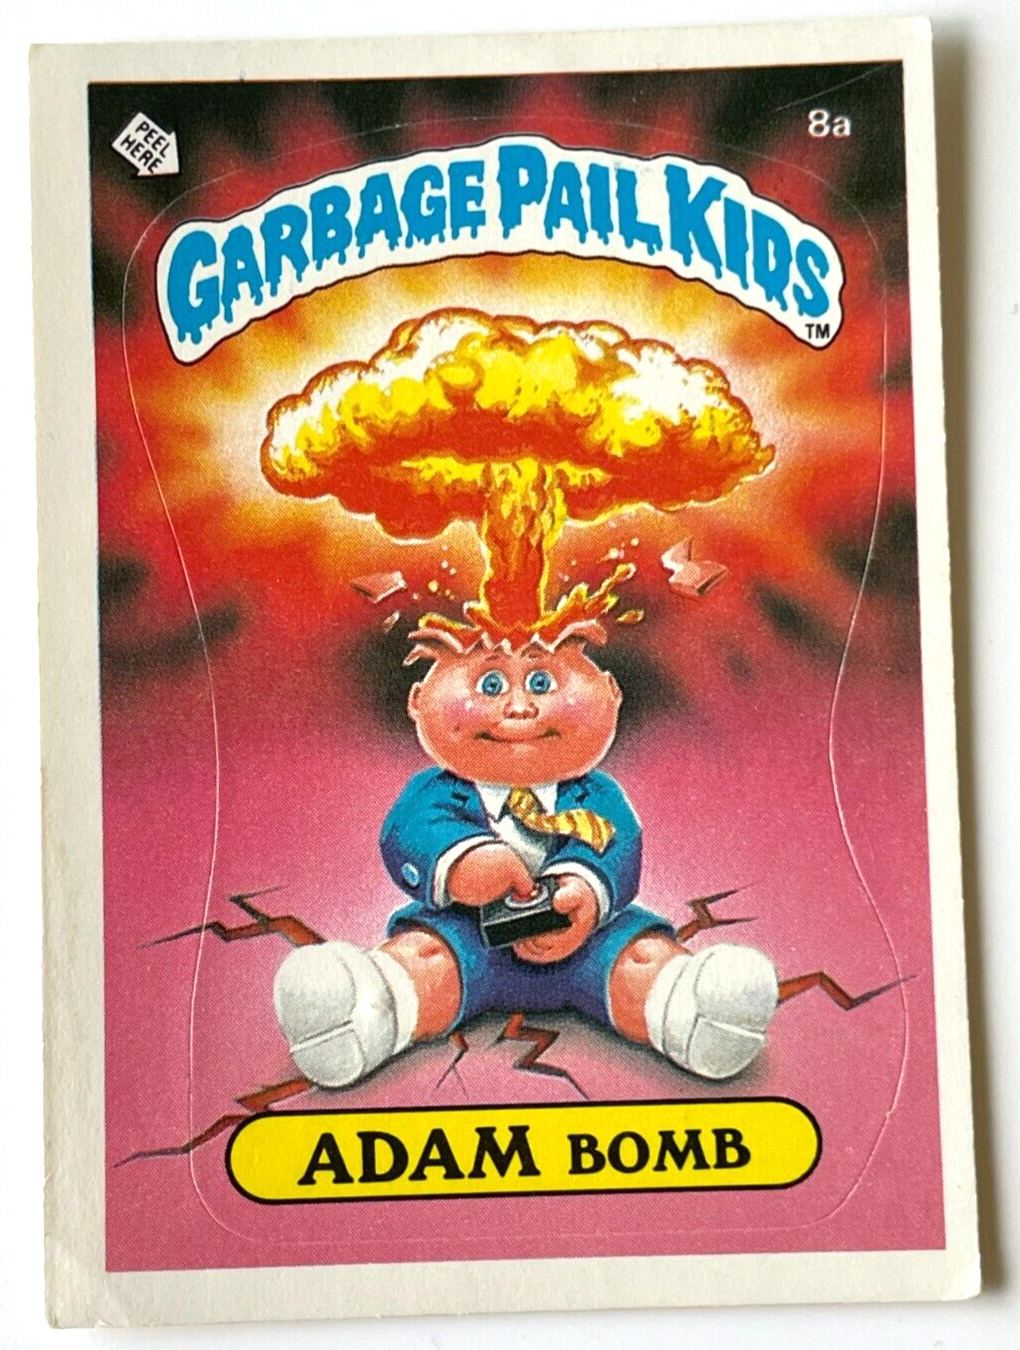 1985 Topps Garbage Pail Kids OS1 1st Series ADAM BOMB Checklist Card 8a GLOSSY